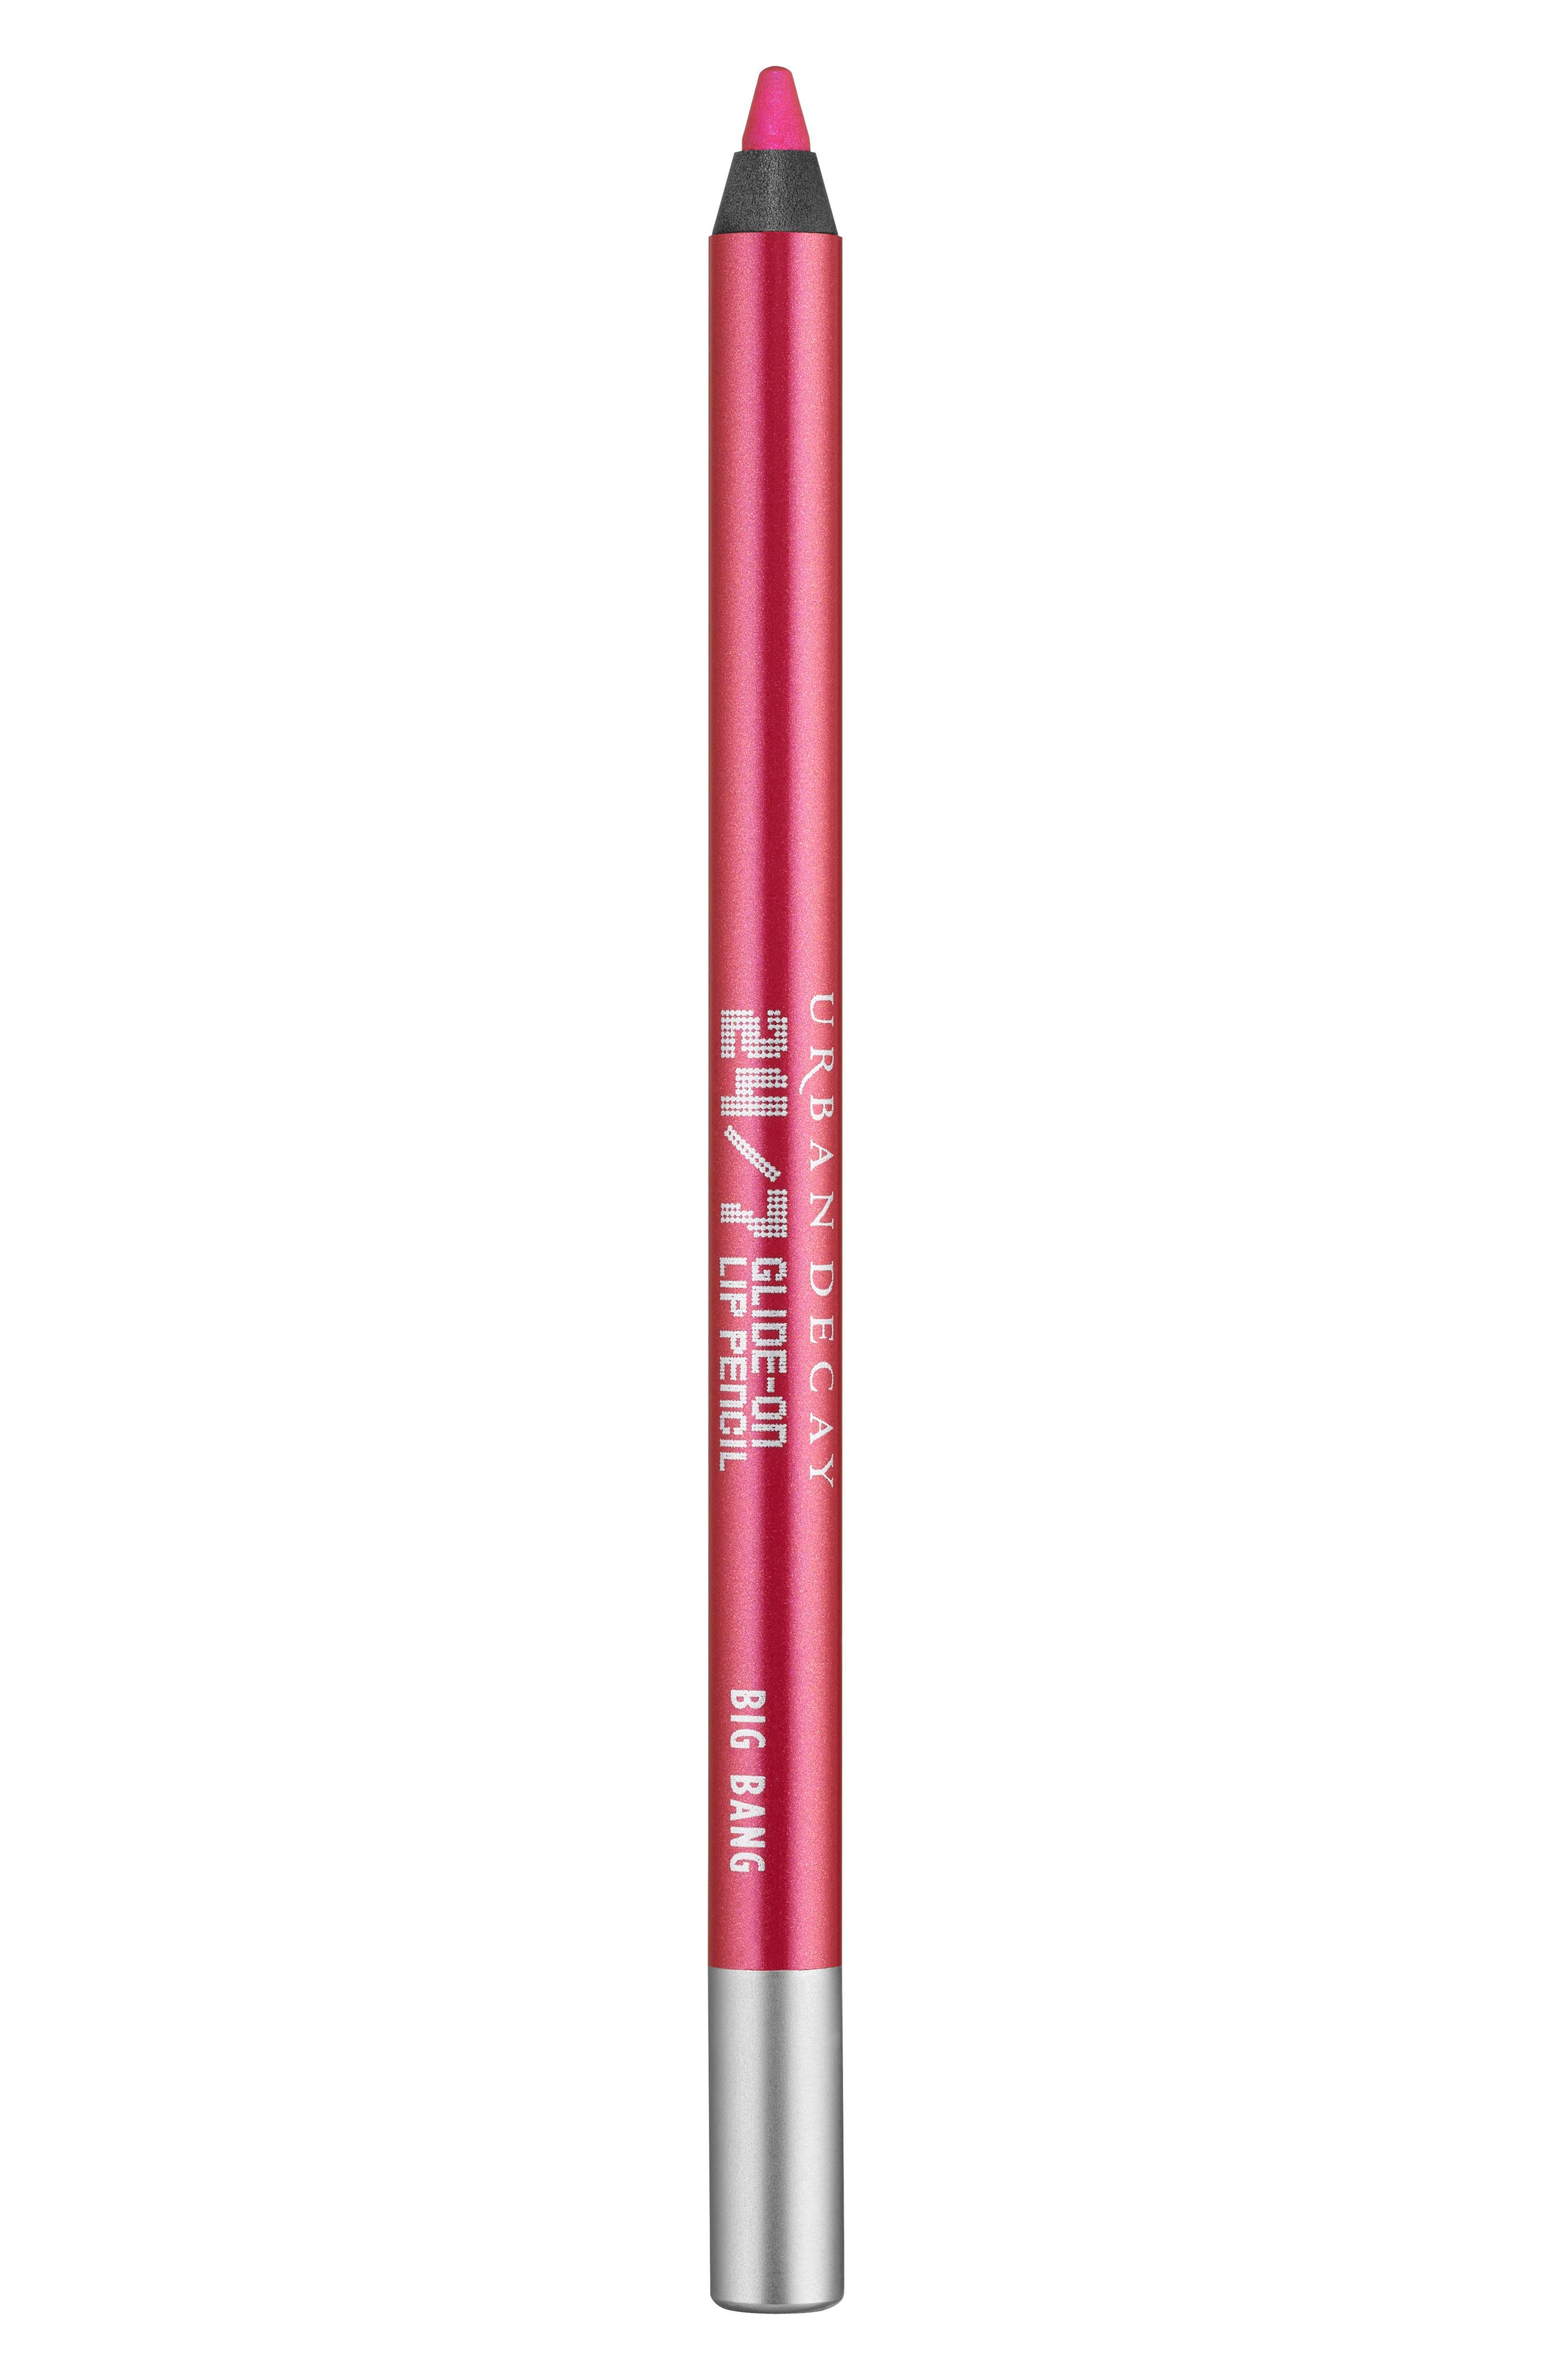 EAN 3605971216114 product image for Urban Decay 24/7 Glide-On Lip Pencil in Big Bang at Nordstrom | upcitemdb.com